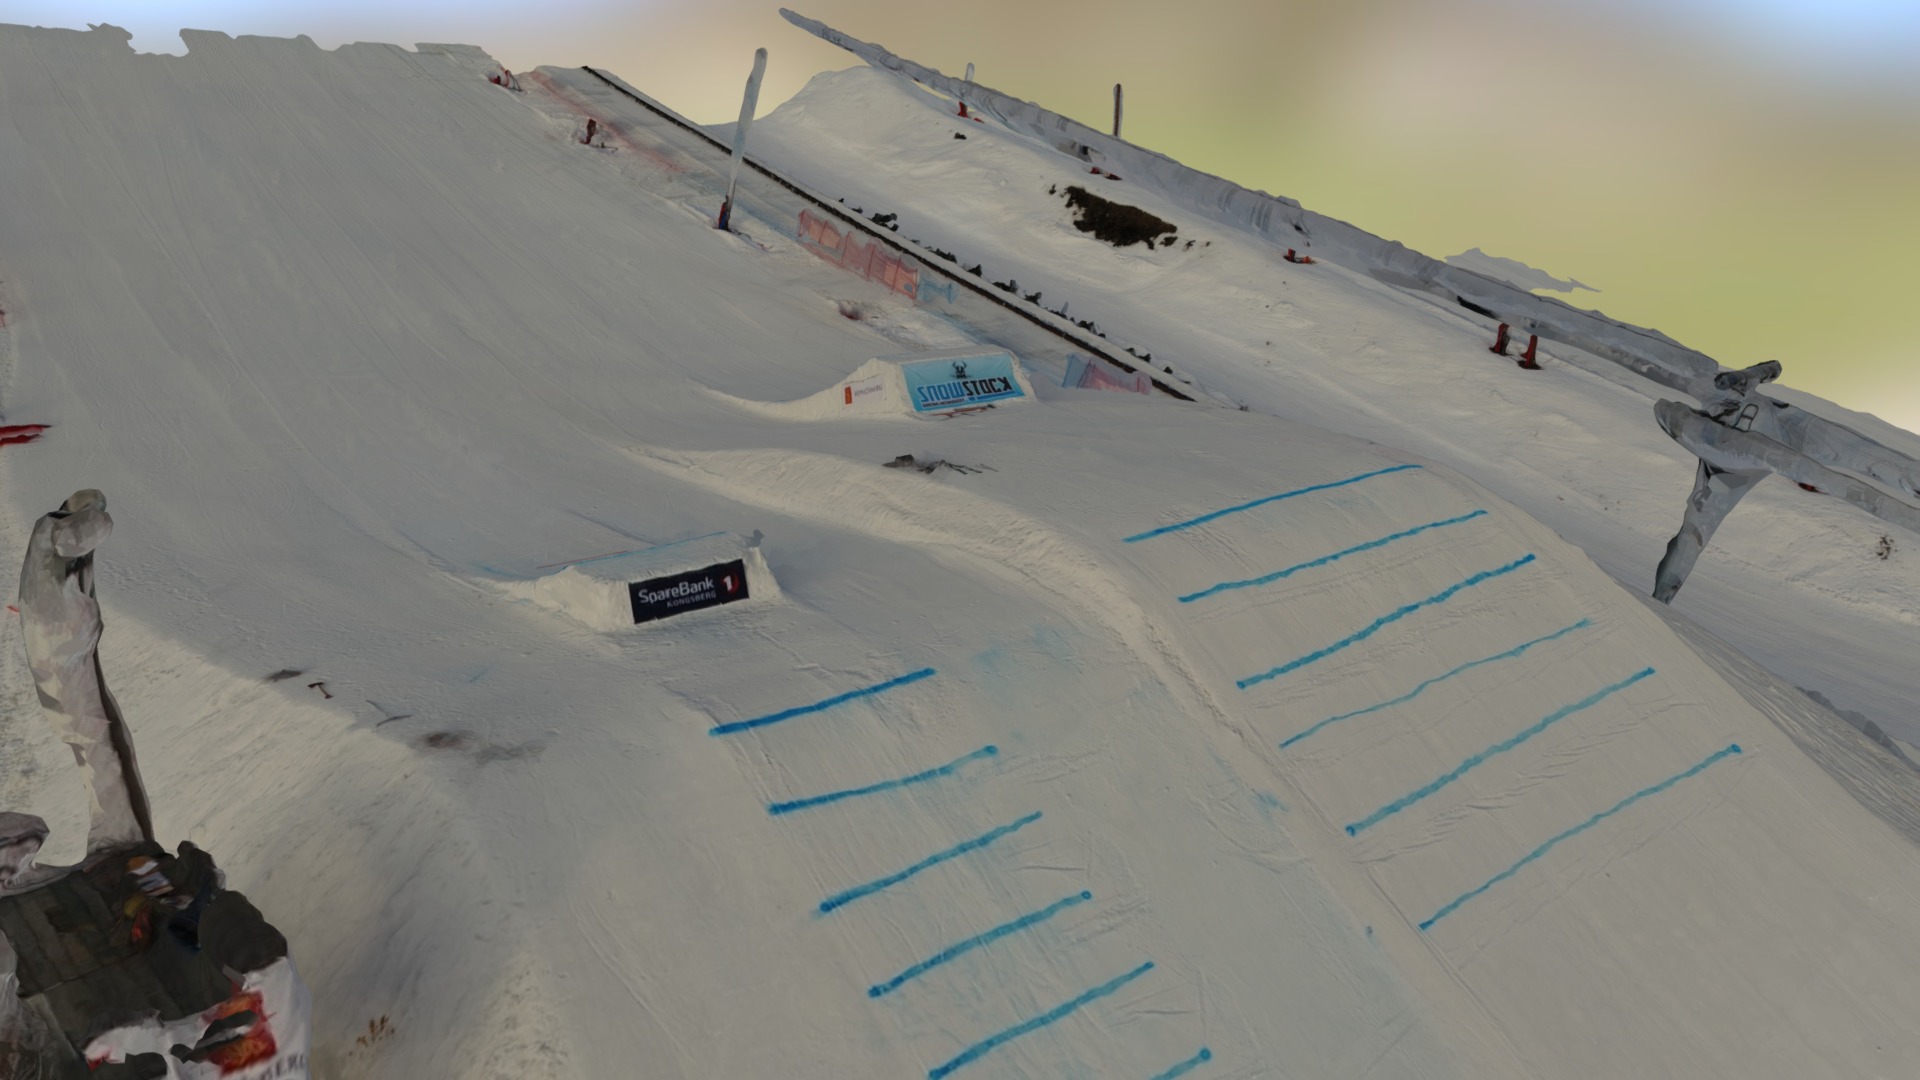 3D model Snowstock 2017 @ Kongsberg Skisenter - This is a 3D model of the Snowstock 2017 @ Kongsberg Skisenter. The 3D model is about a snow covered mountain.